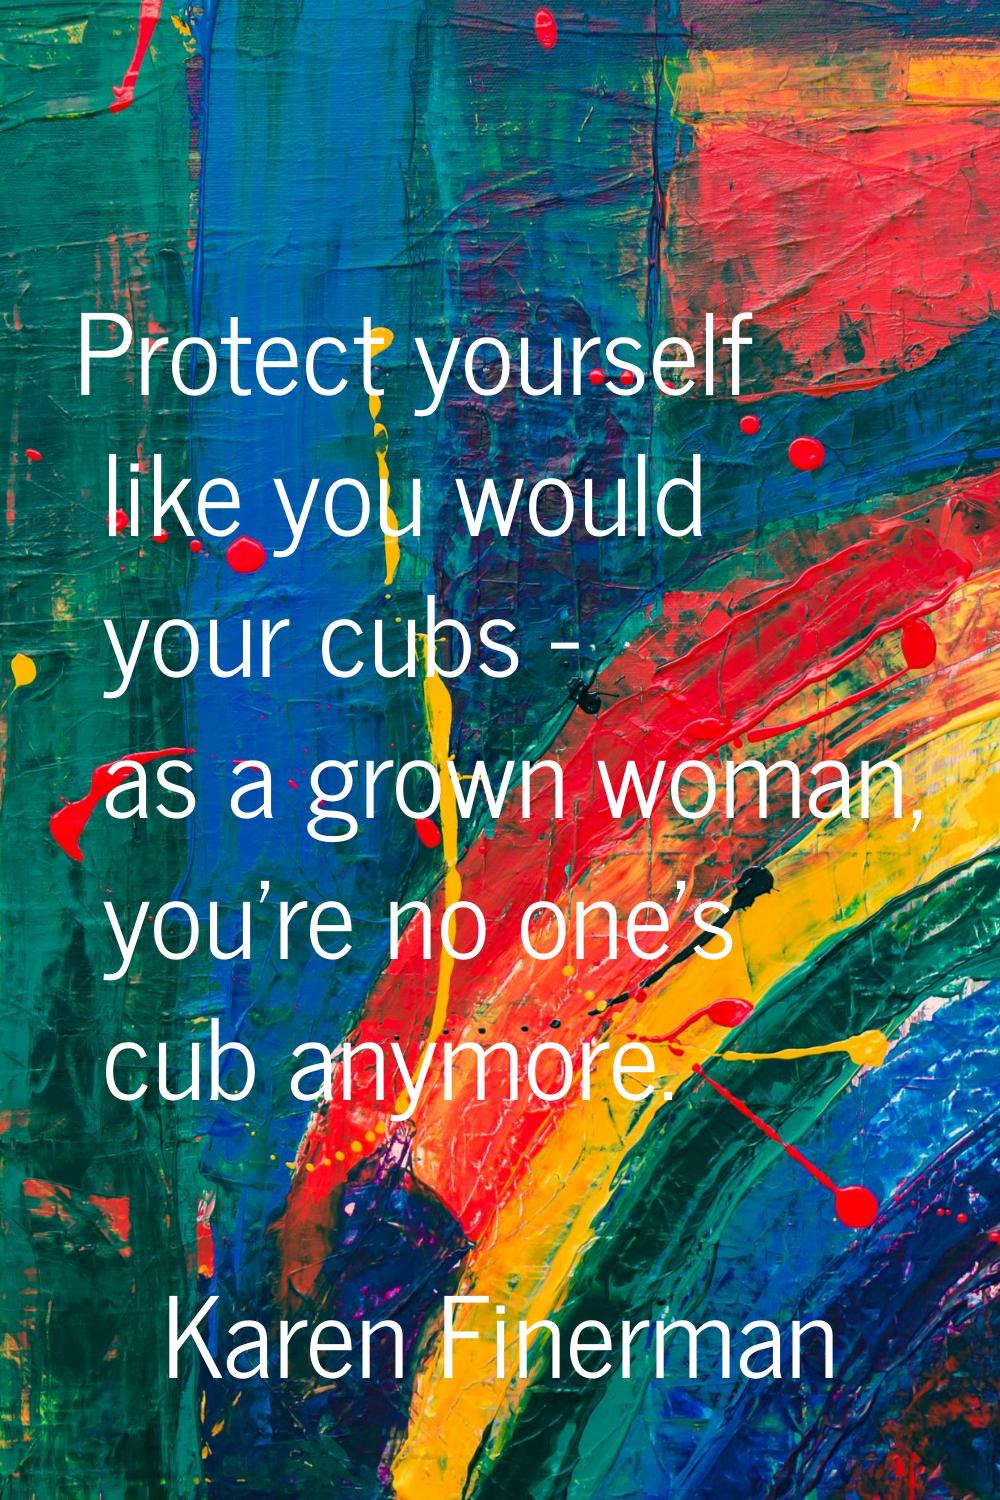 Protect yourself like you would your cubs - as a grown woman, you're no one's cub anymore.